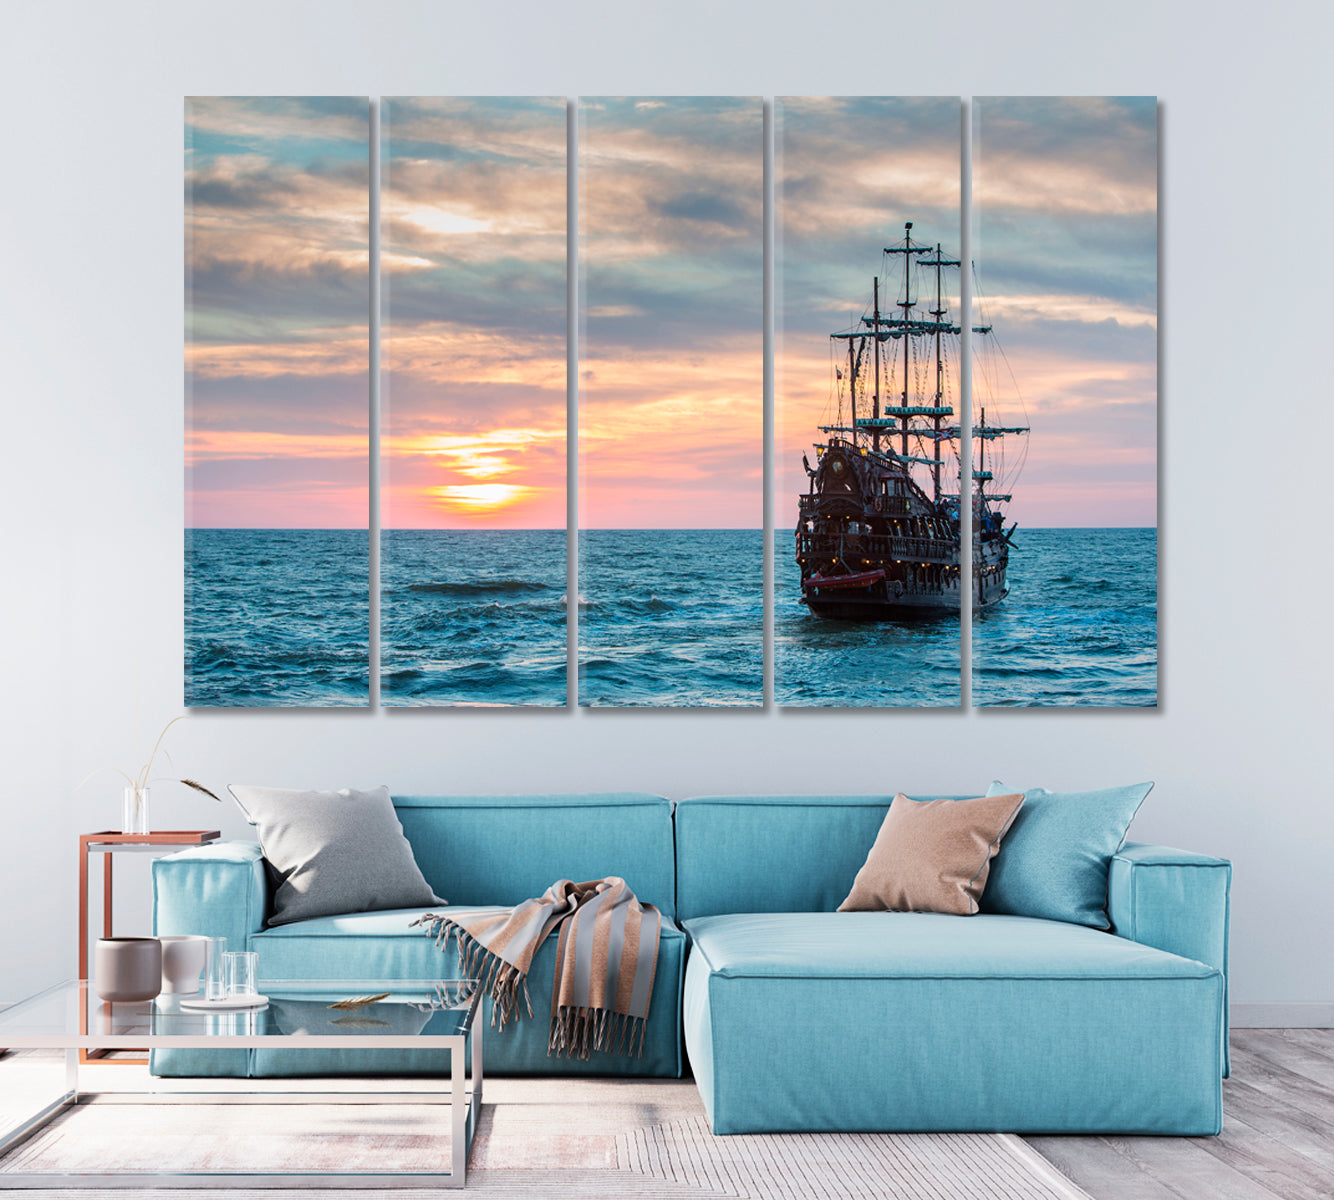 Old Ship in Sea at Sunset Canvas Print-Canvas Print-CetArt-1 Panel-24x16 inches-CetArt